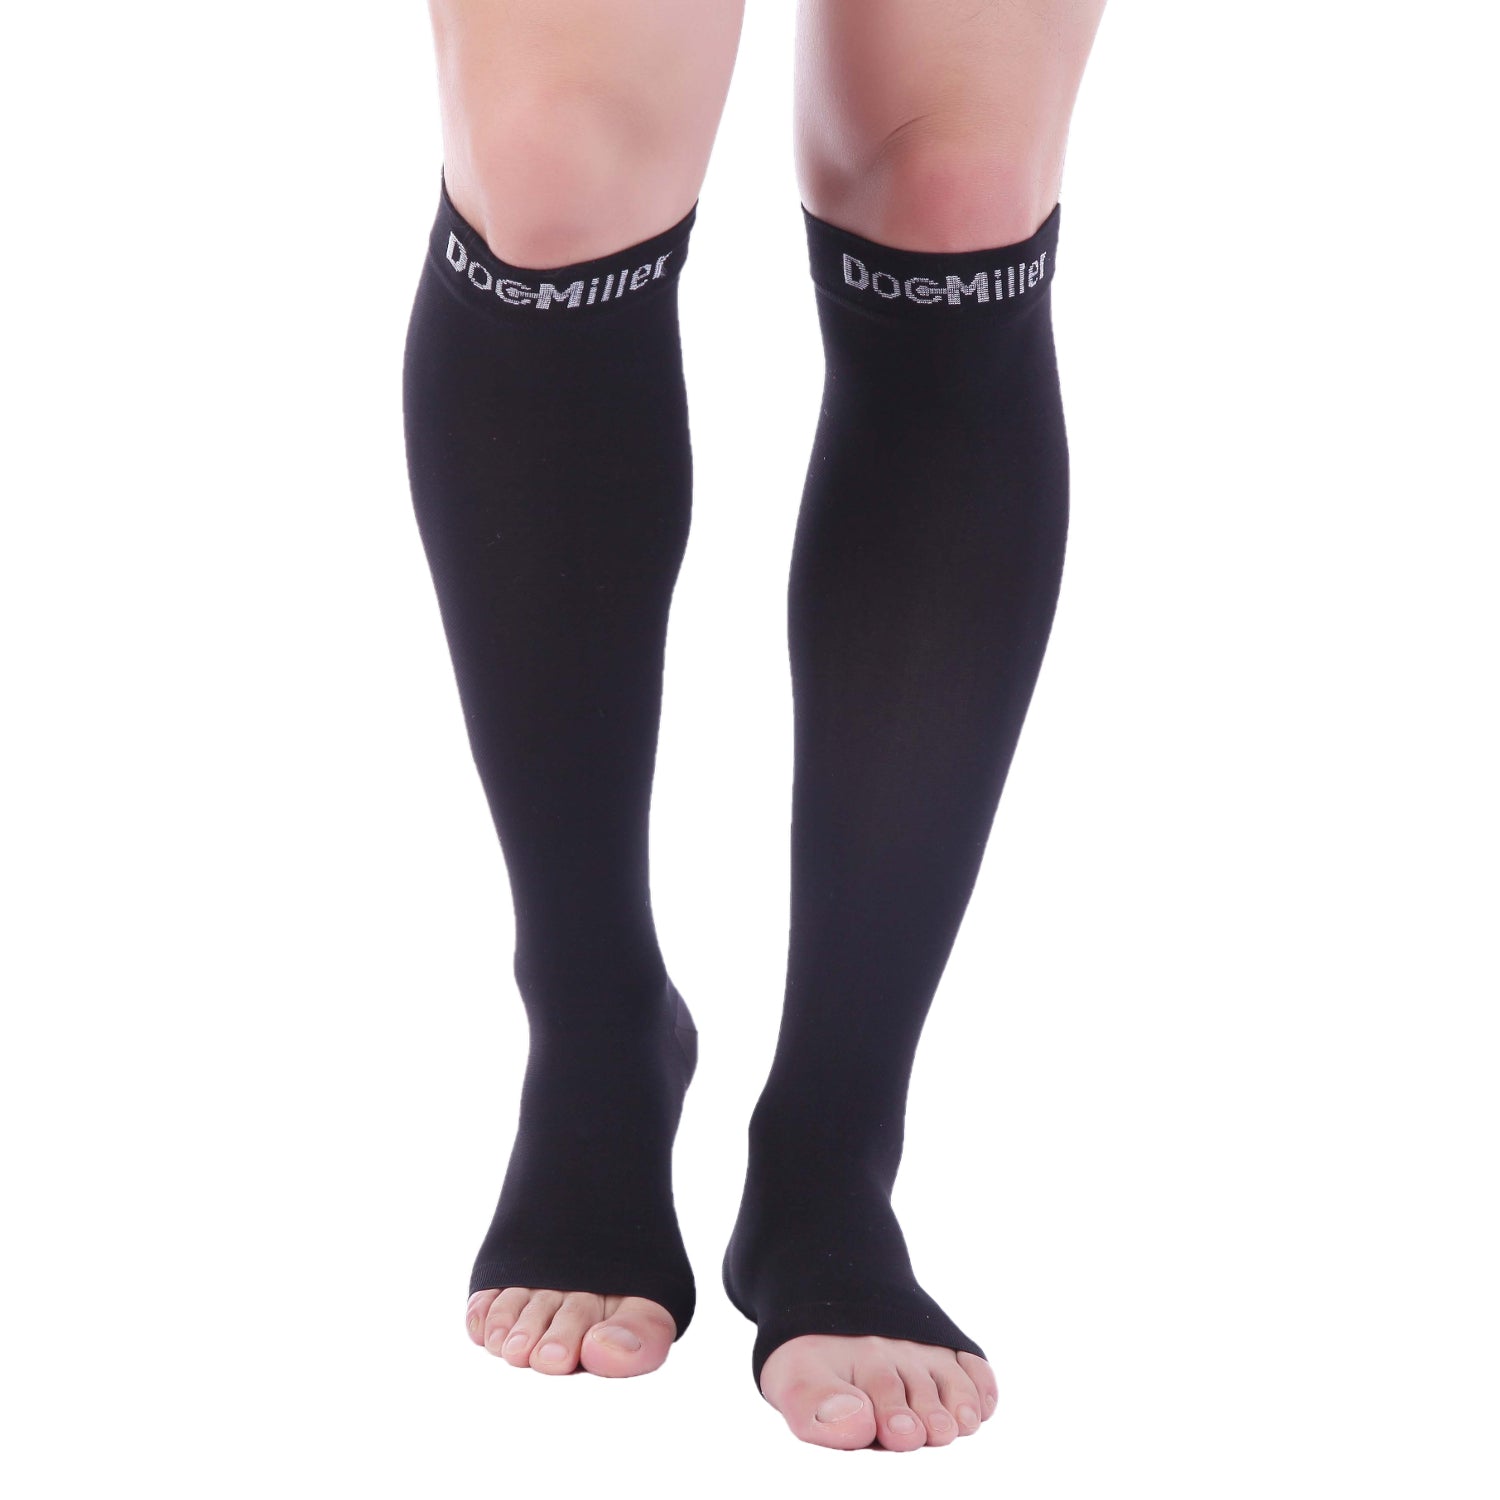 20-30 Compression Medical Grade Stockings for Men and Women, Knee High,  Open Toe